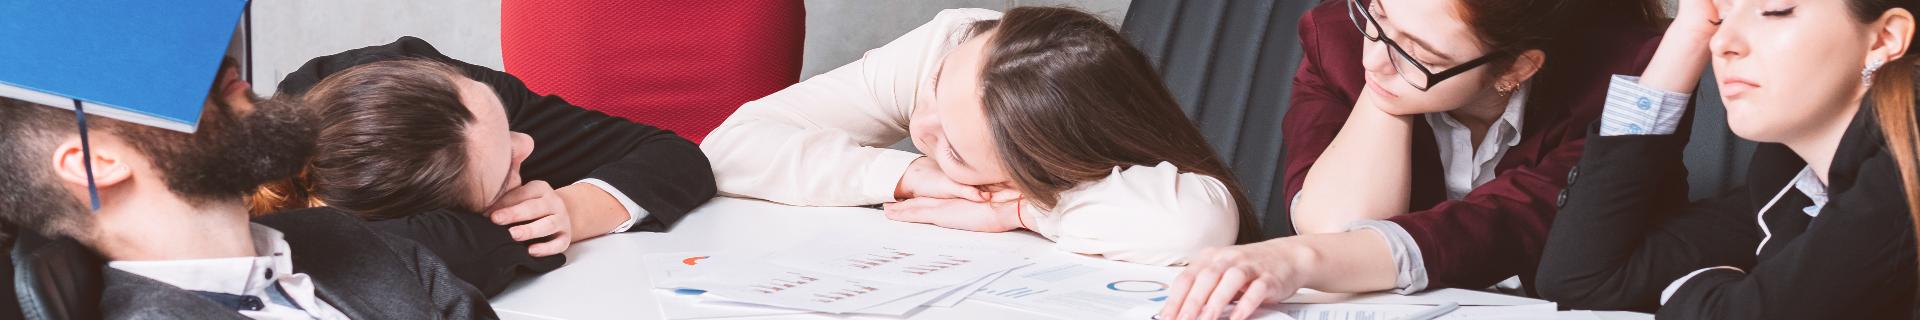 Fighting Fatigue in the Workplace